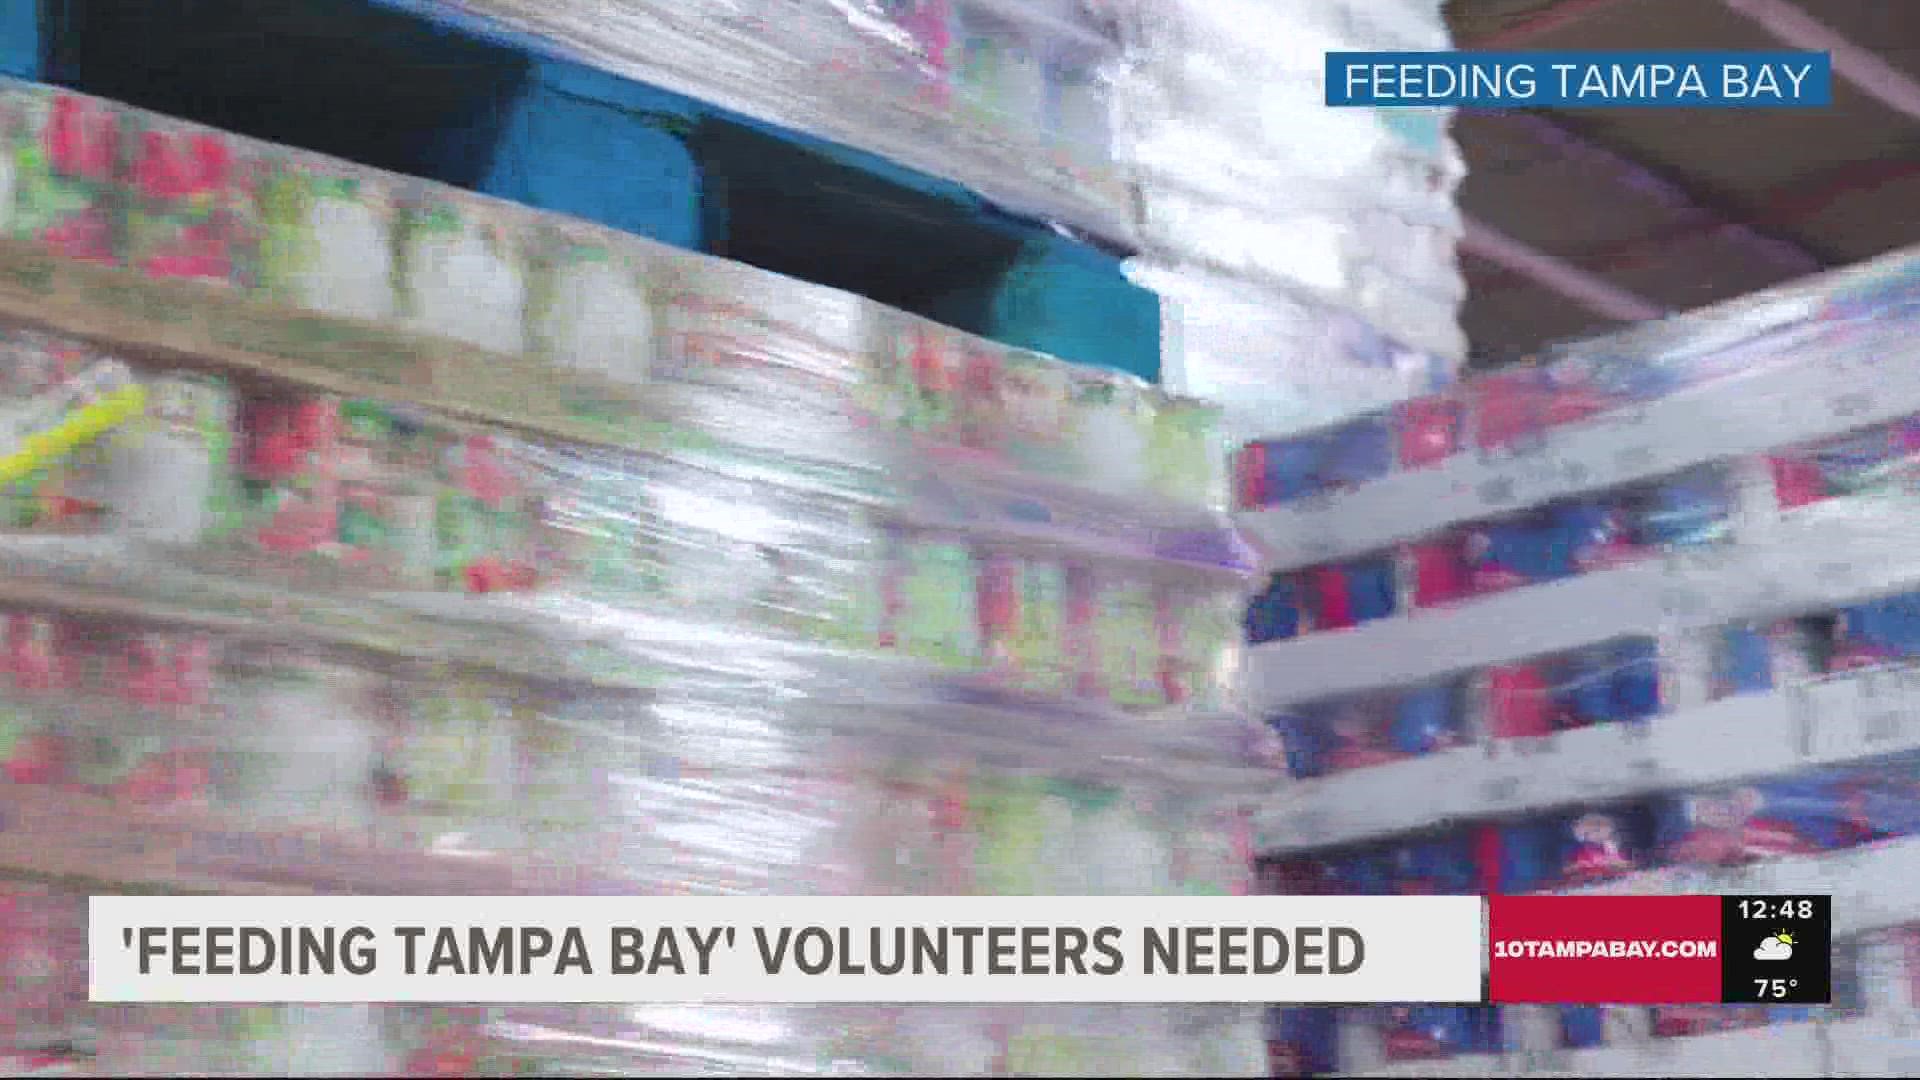 There are hundreds of events and resources that are helping Hurricane Ian victims. You can even volunteer to help.